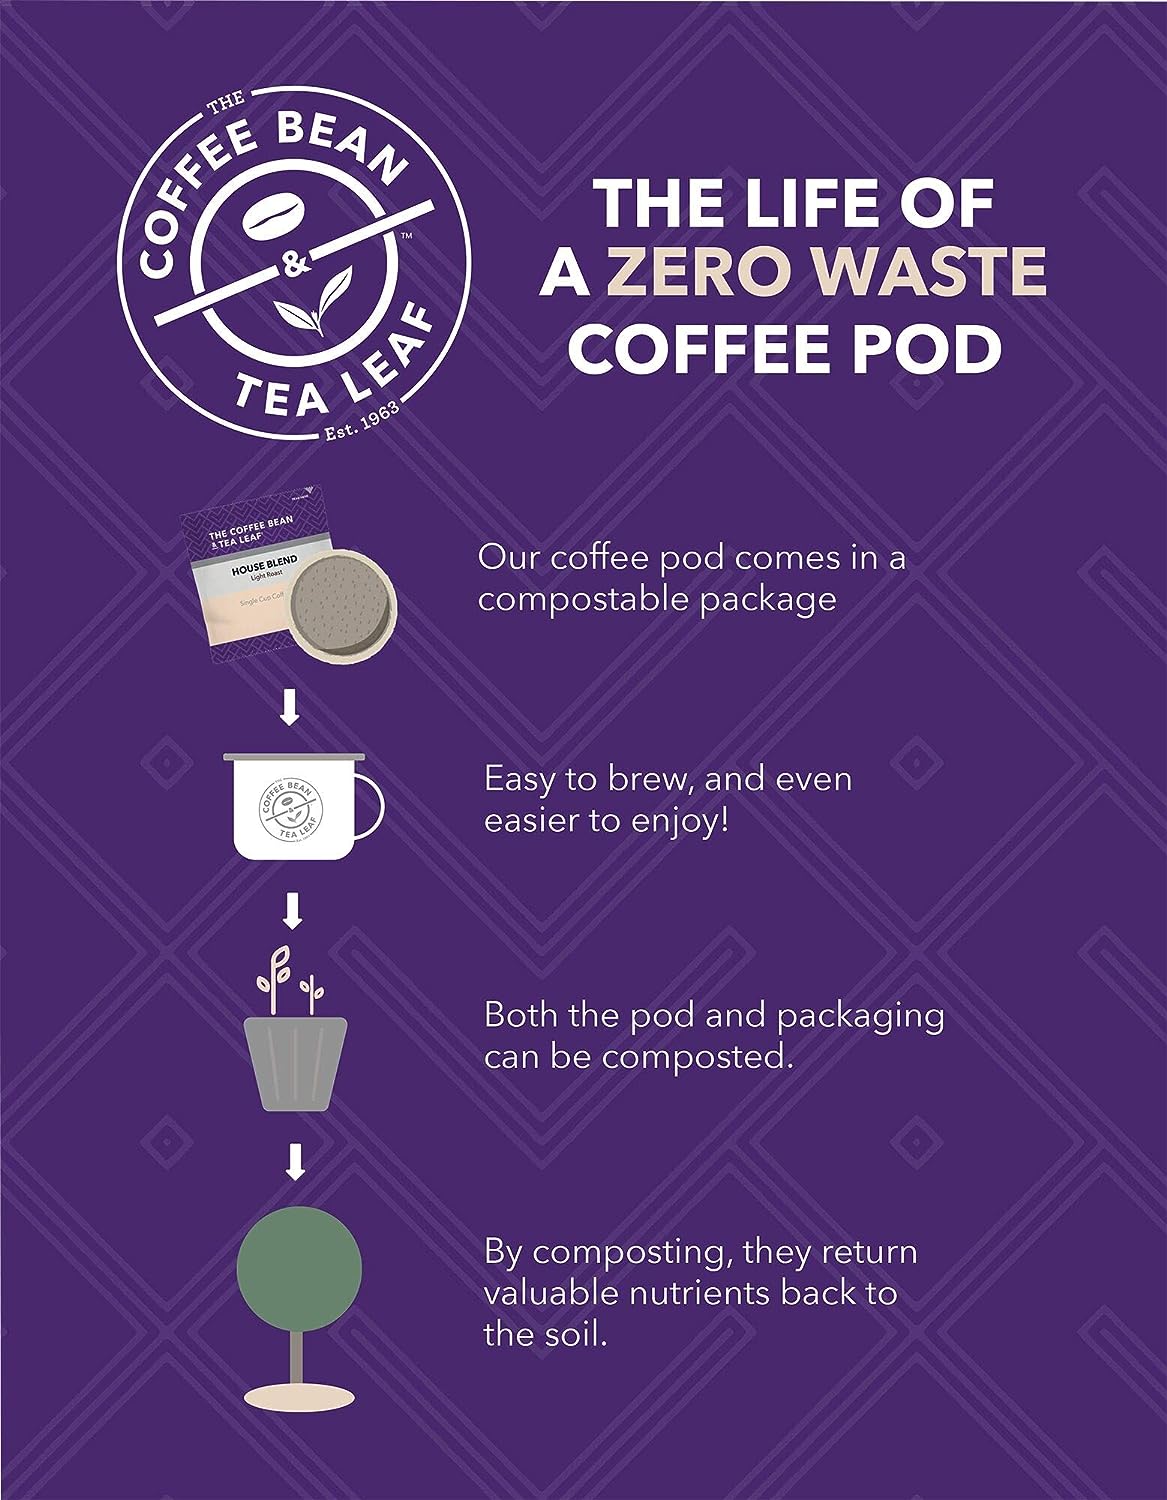 Coffee Bean and Tea Leaf Colombia Coffee Soft Pods info